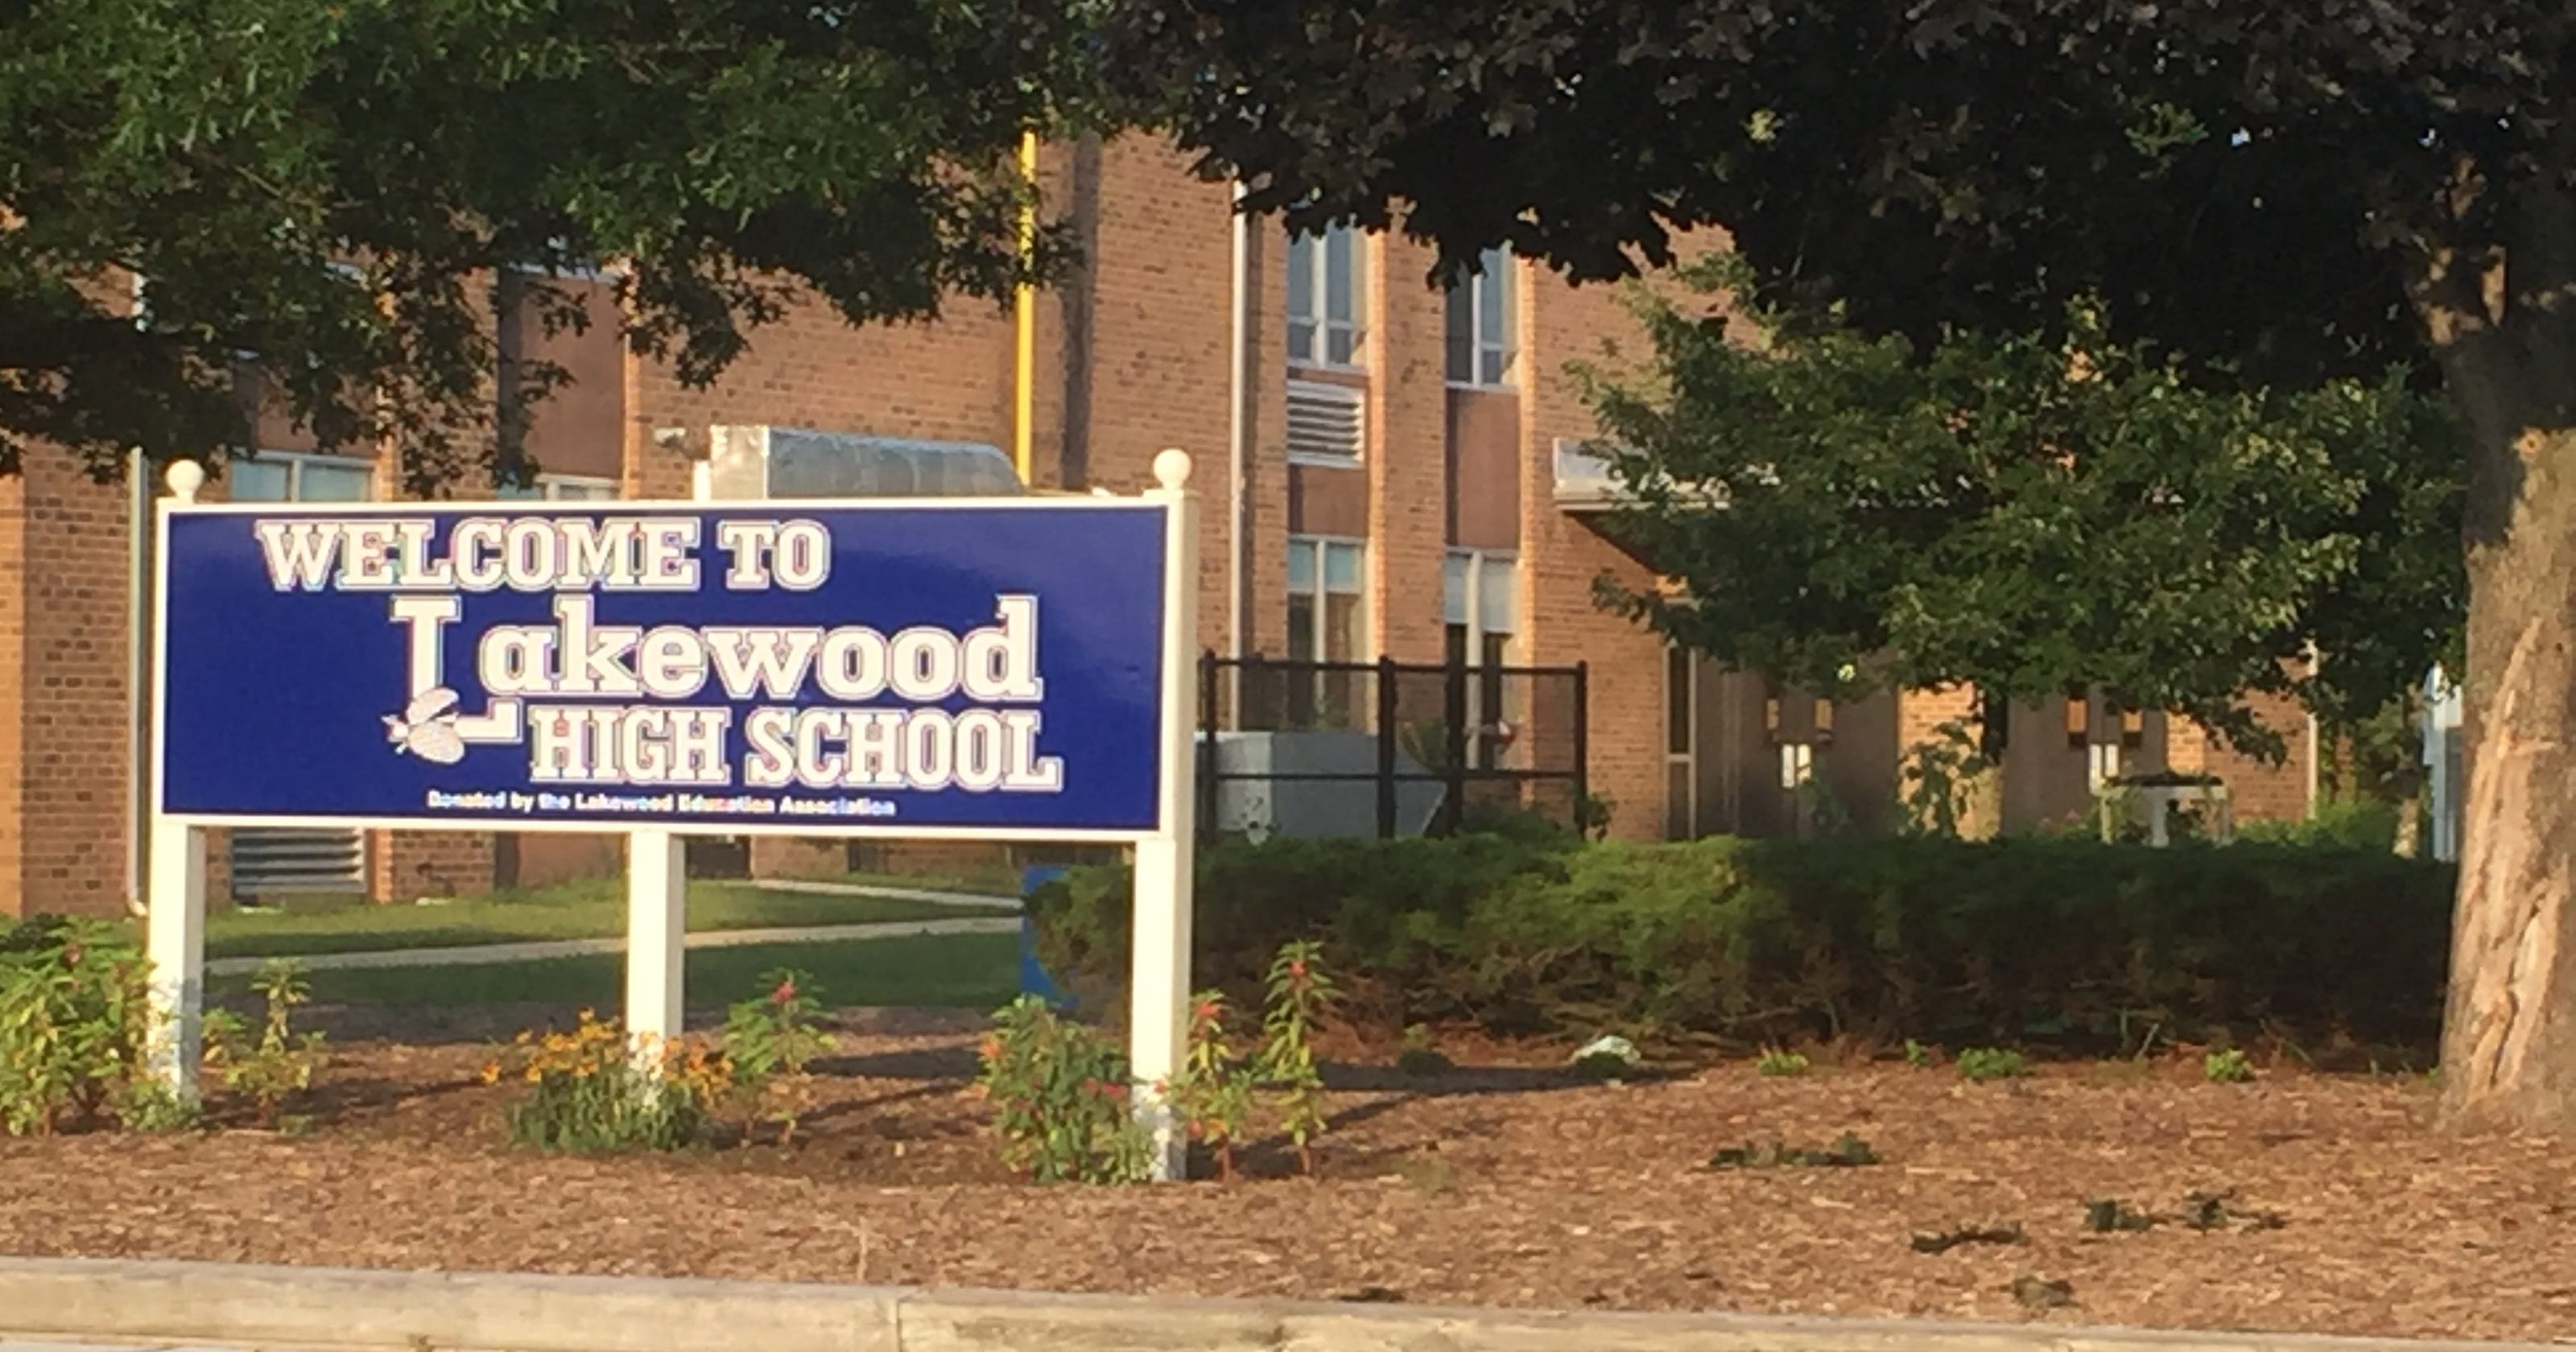 School Principal Porn Captions - Lakewood High School assistant principal charged with child porn